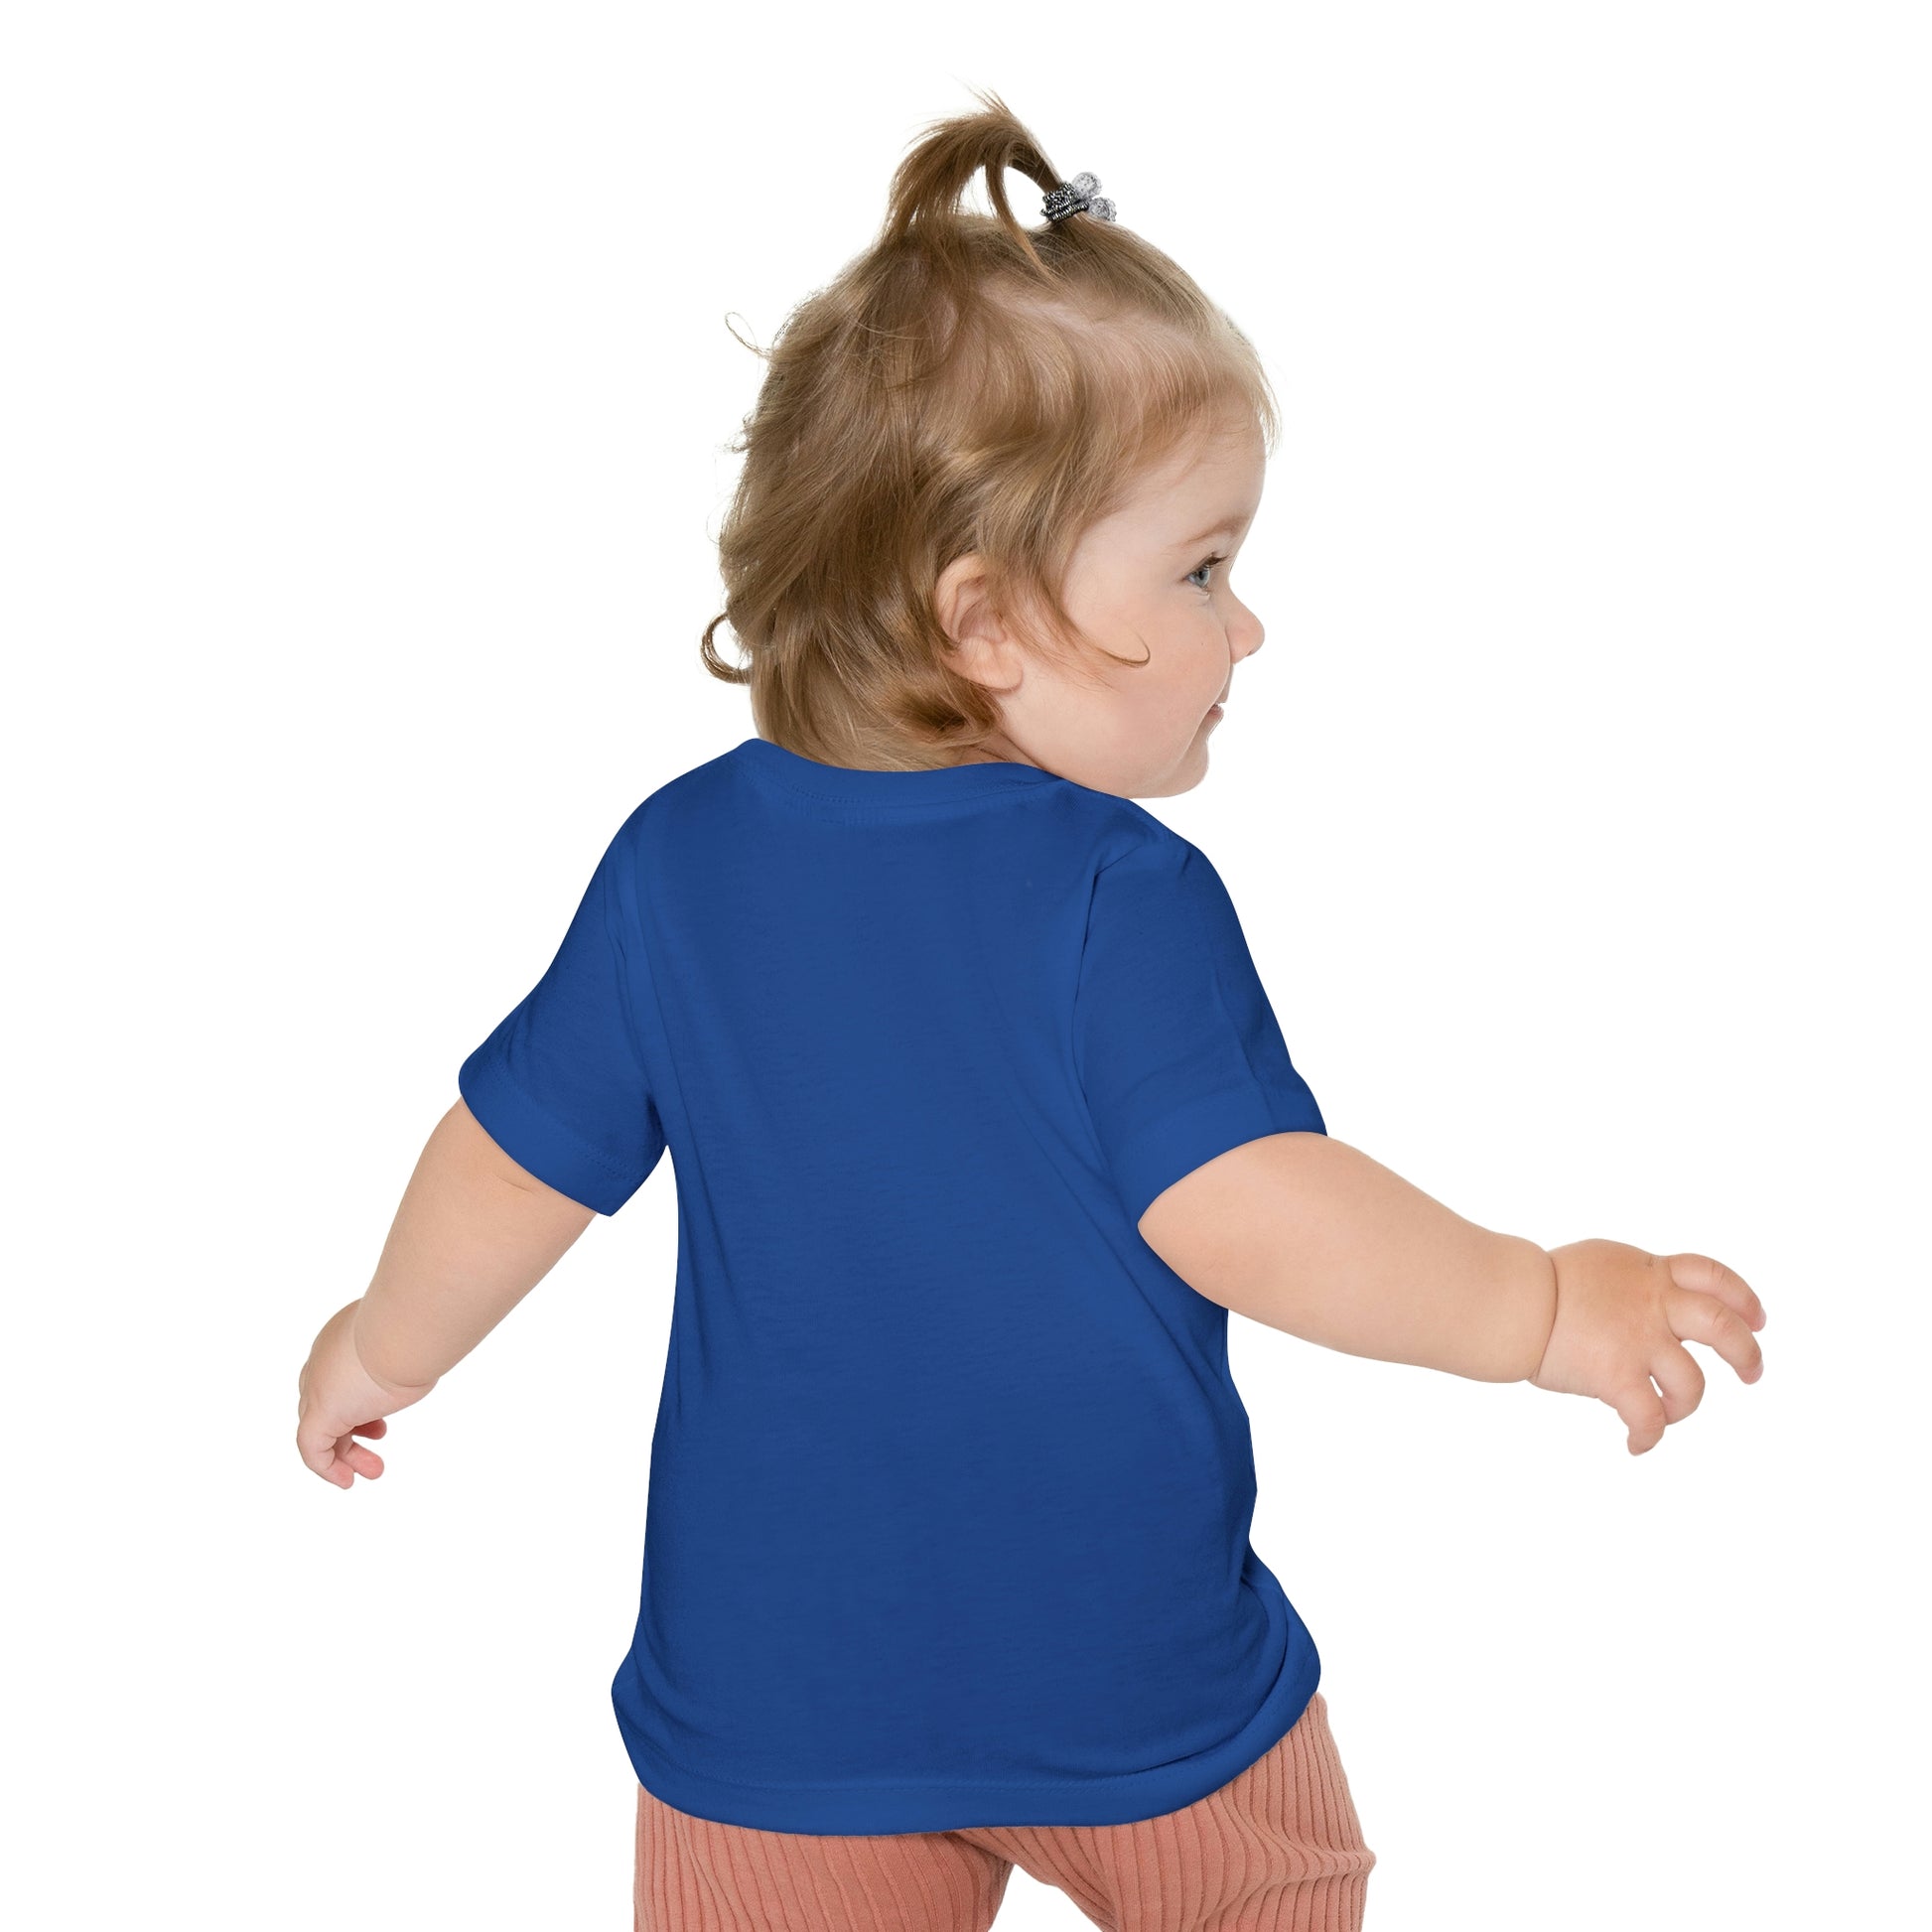 Mock up of the back of the Royal t-shirt as seen on a child